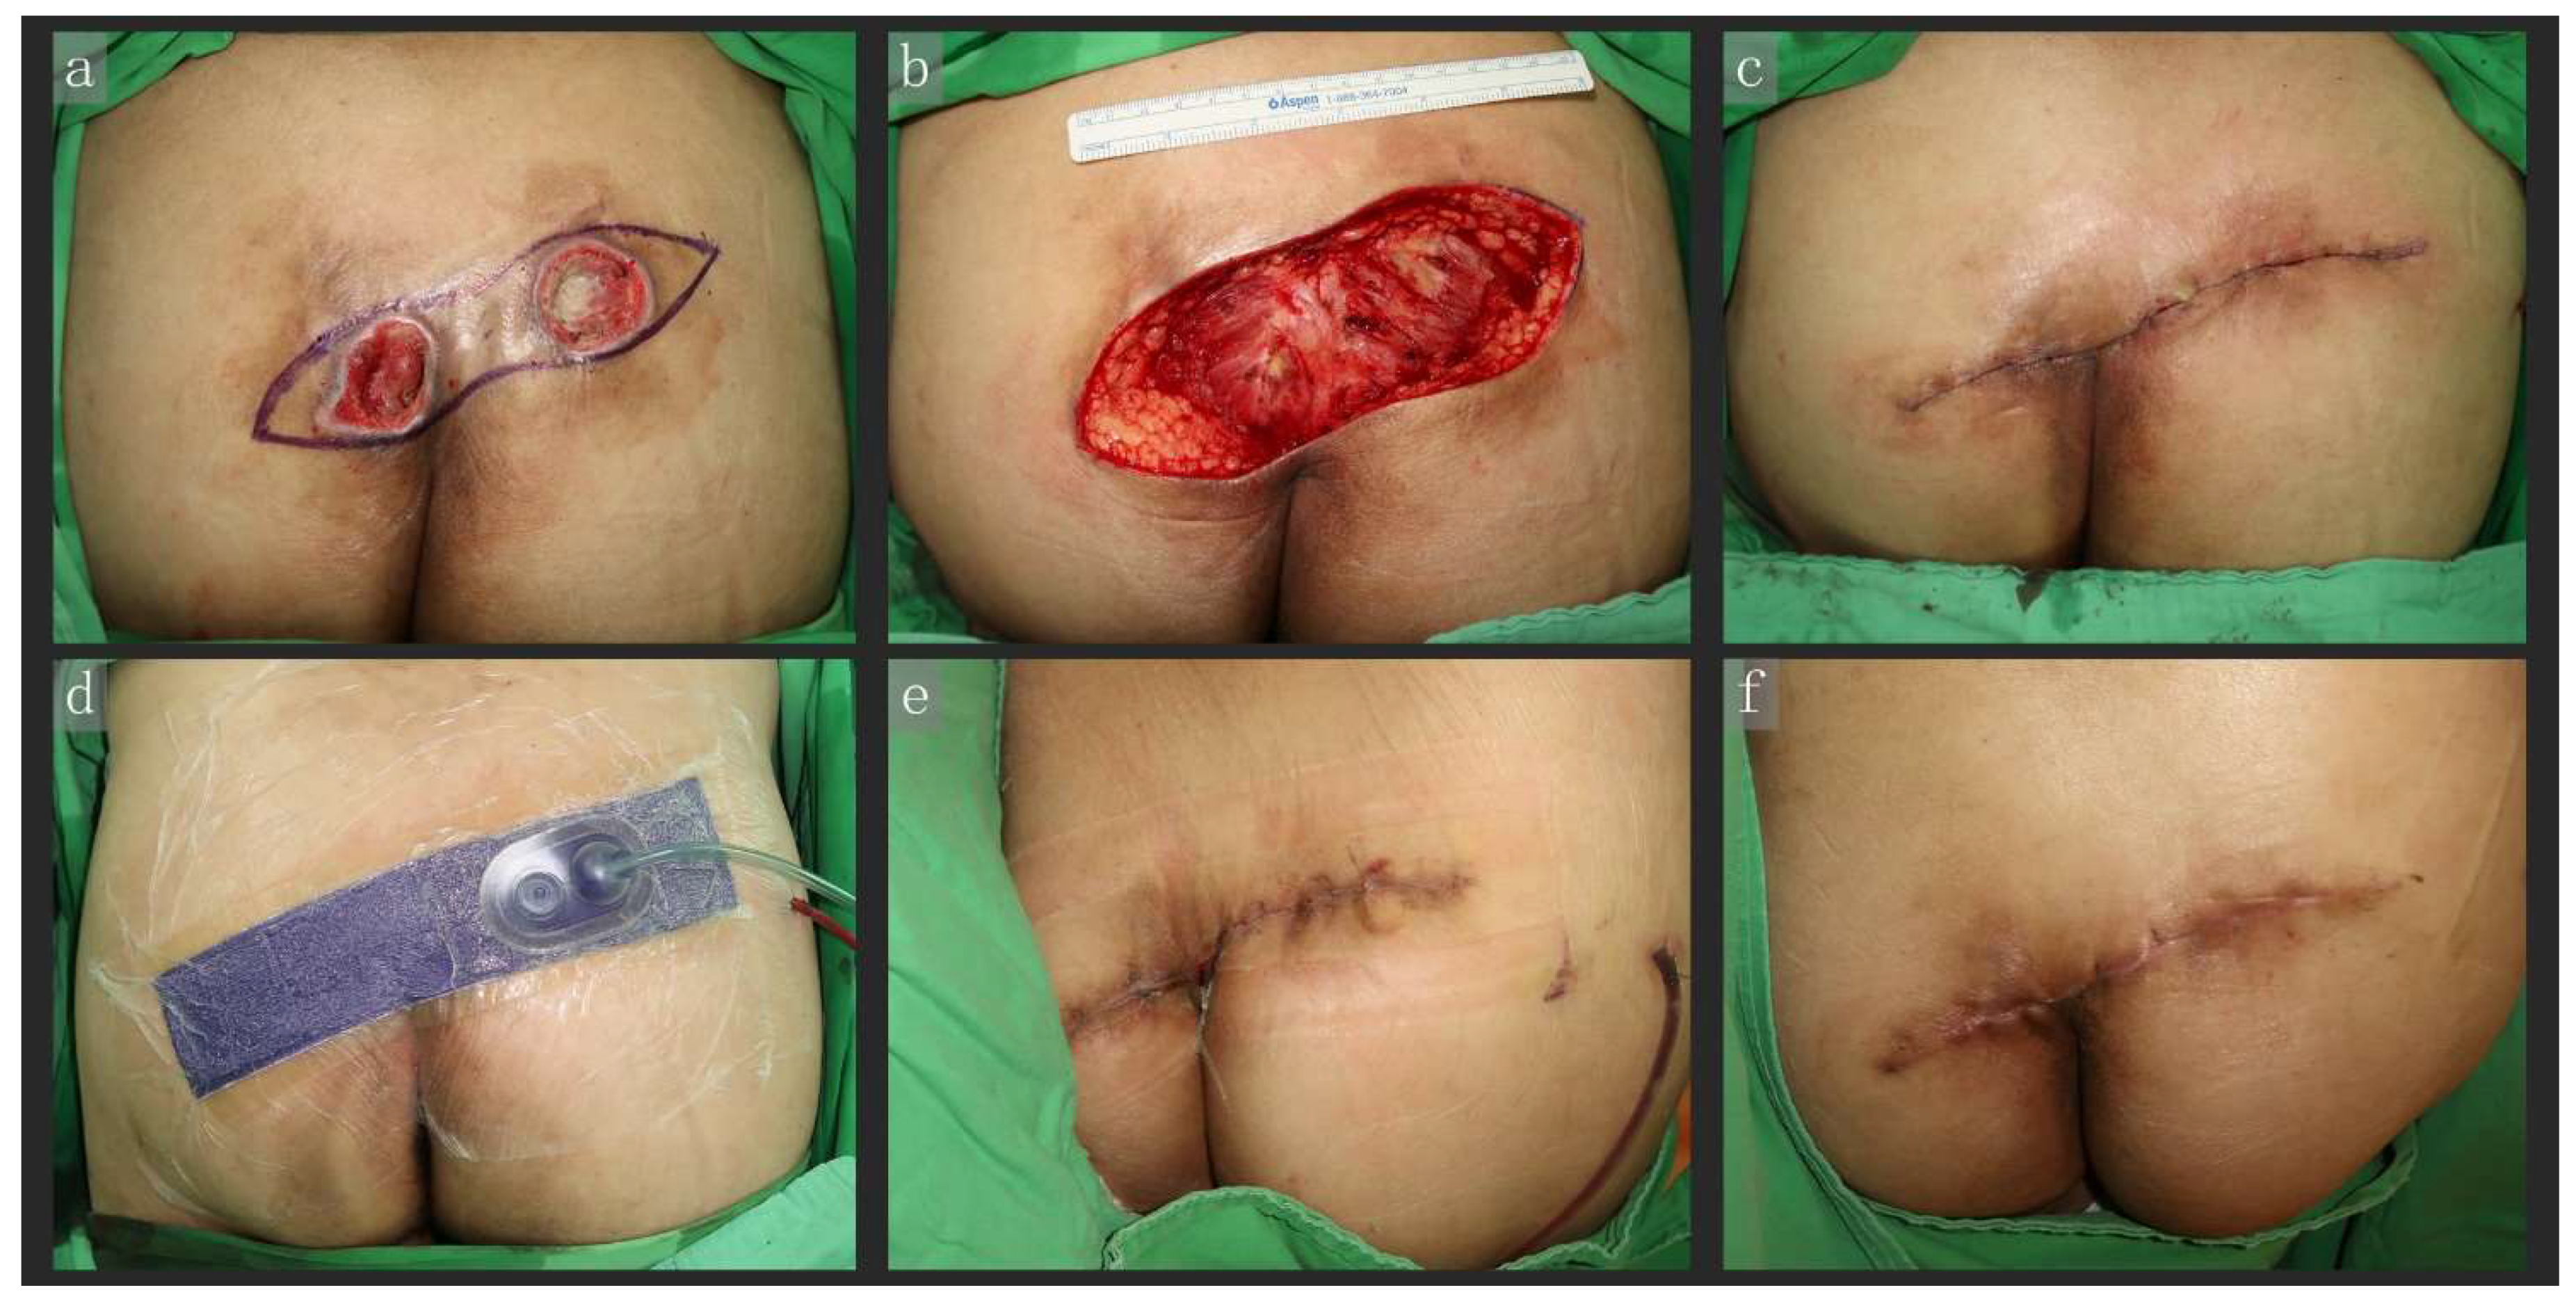 Appearance of the right breast after wound cleaning. A large ulcer is